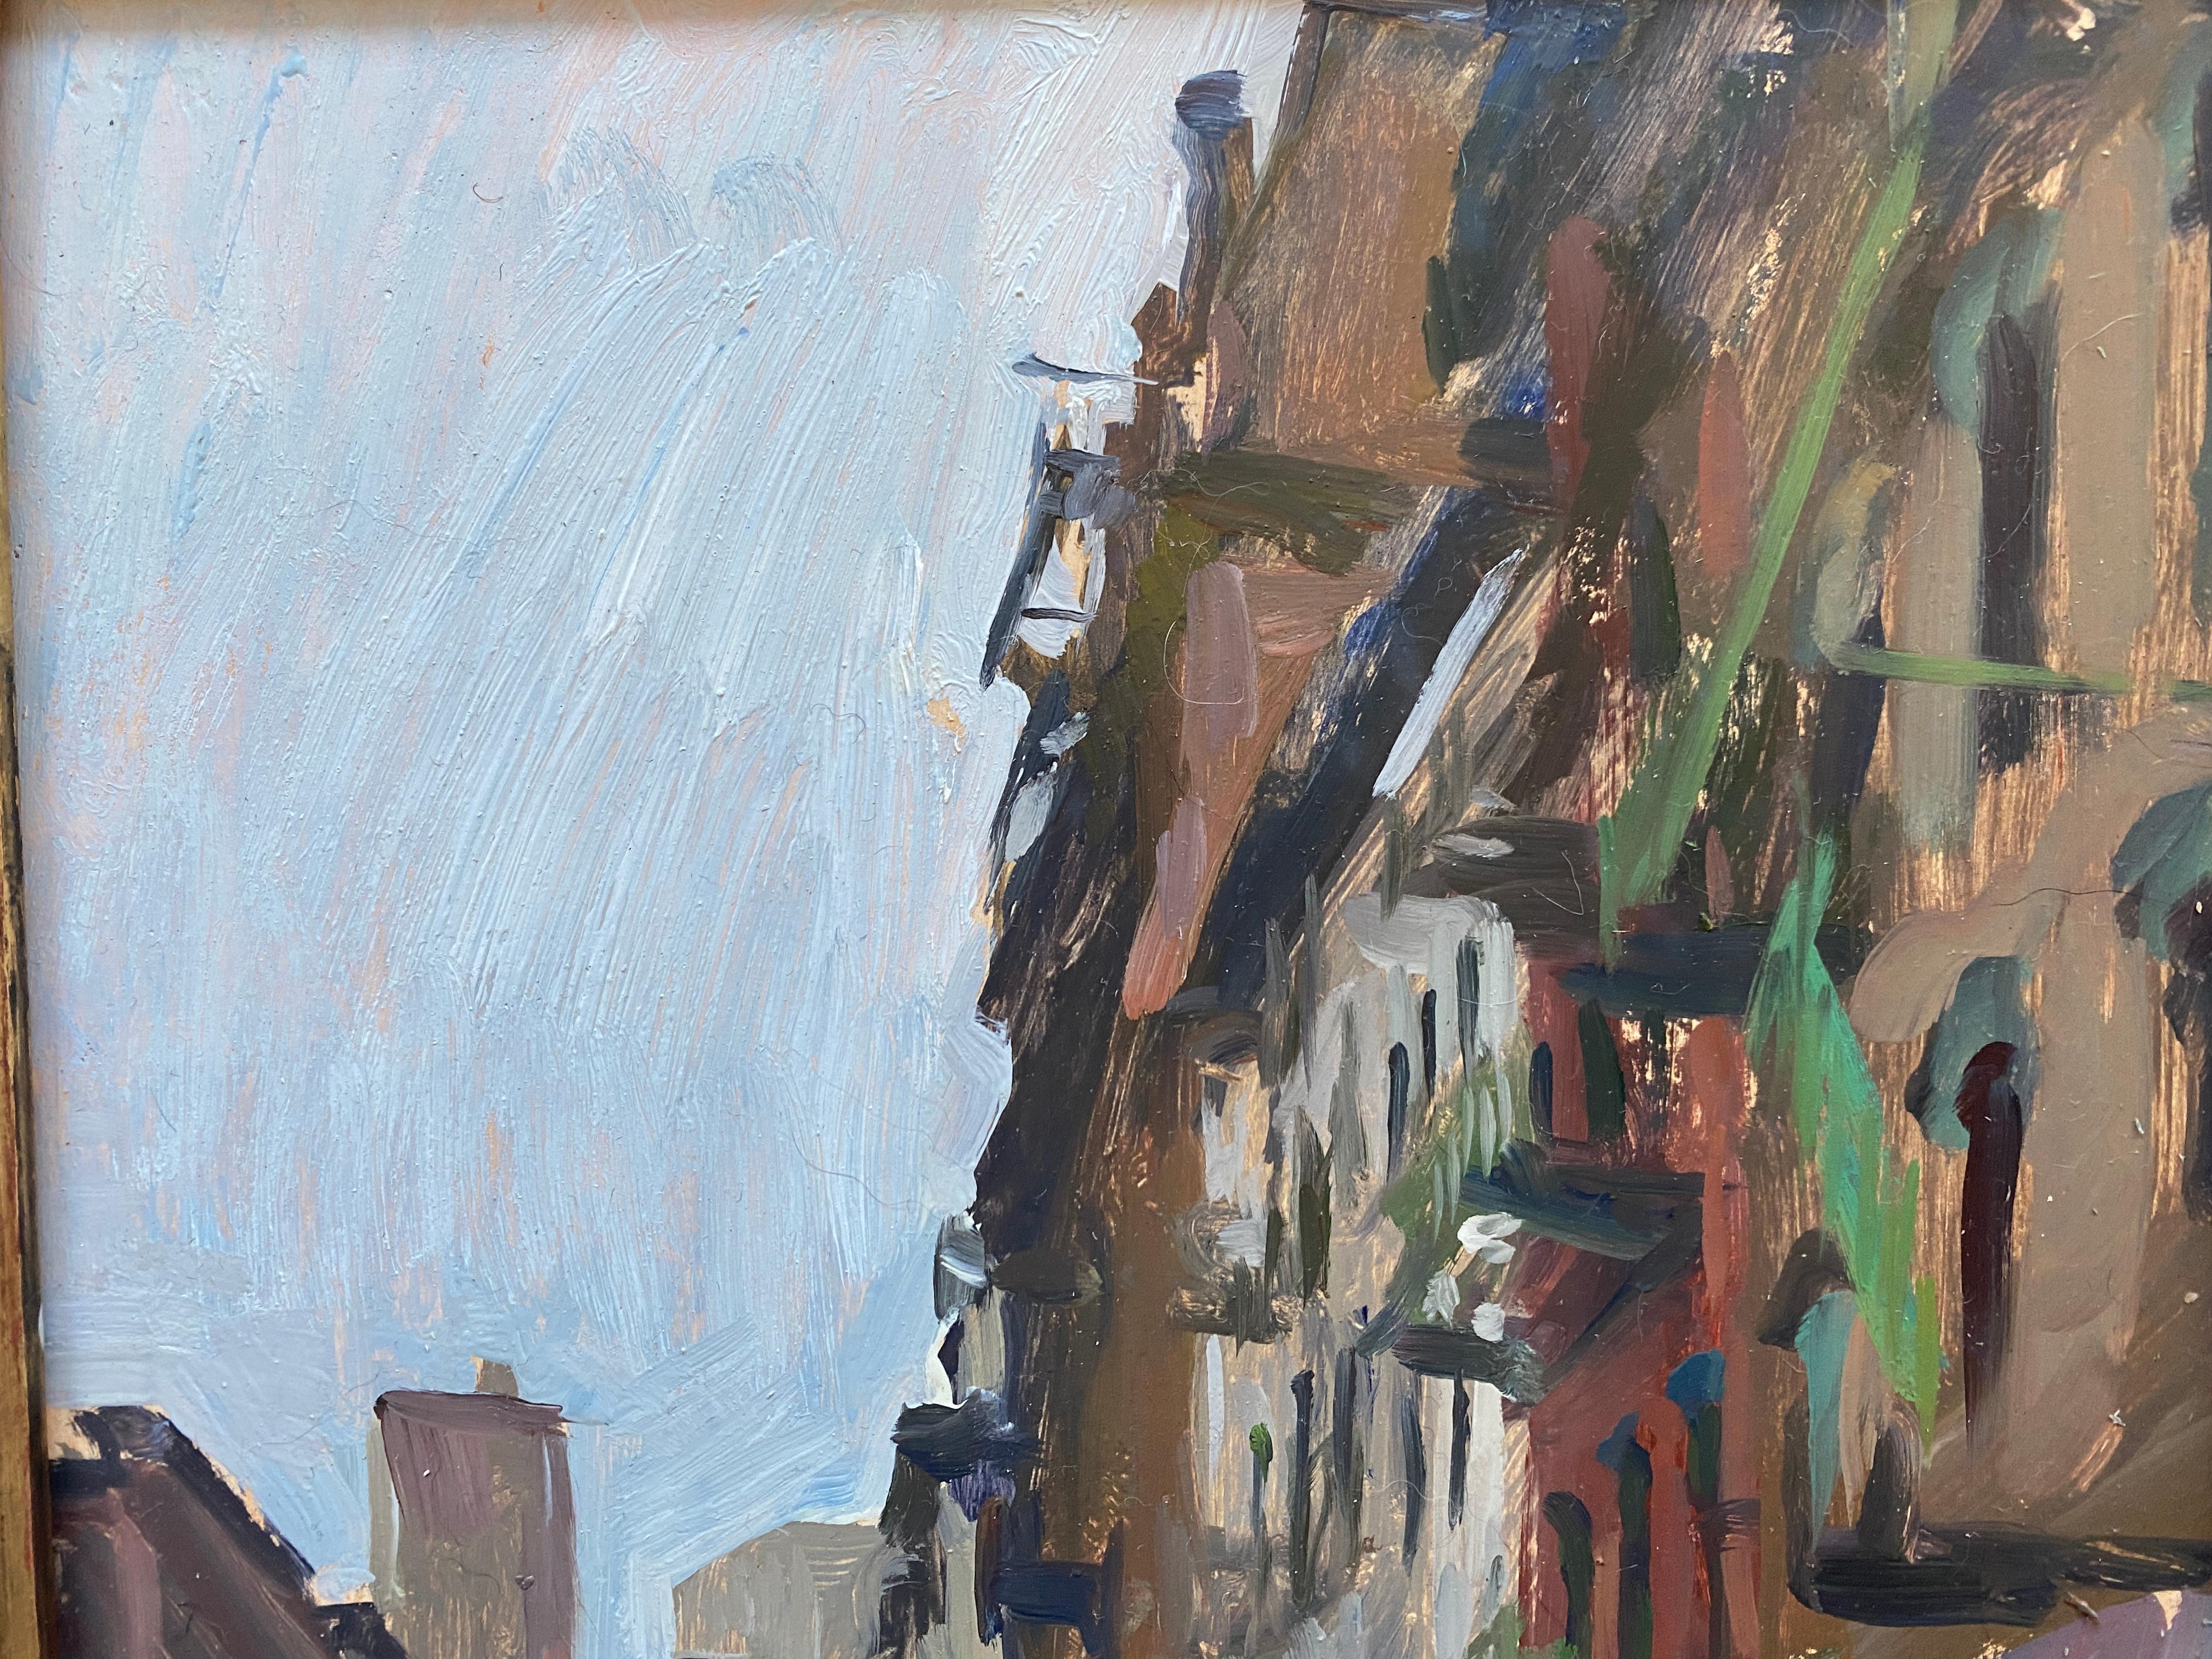 An oil painting of a street scene in Chinatown, in New York City. Cars are parked along the side of the street, and colorful awnings reach over the sidewalk. Painted on site, on the sidewalk in Manhattan, a vertically oriented panel captures city